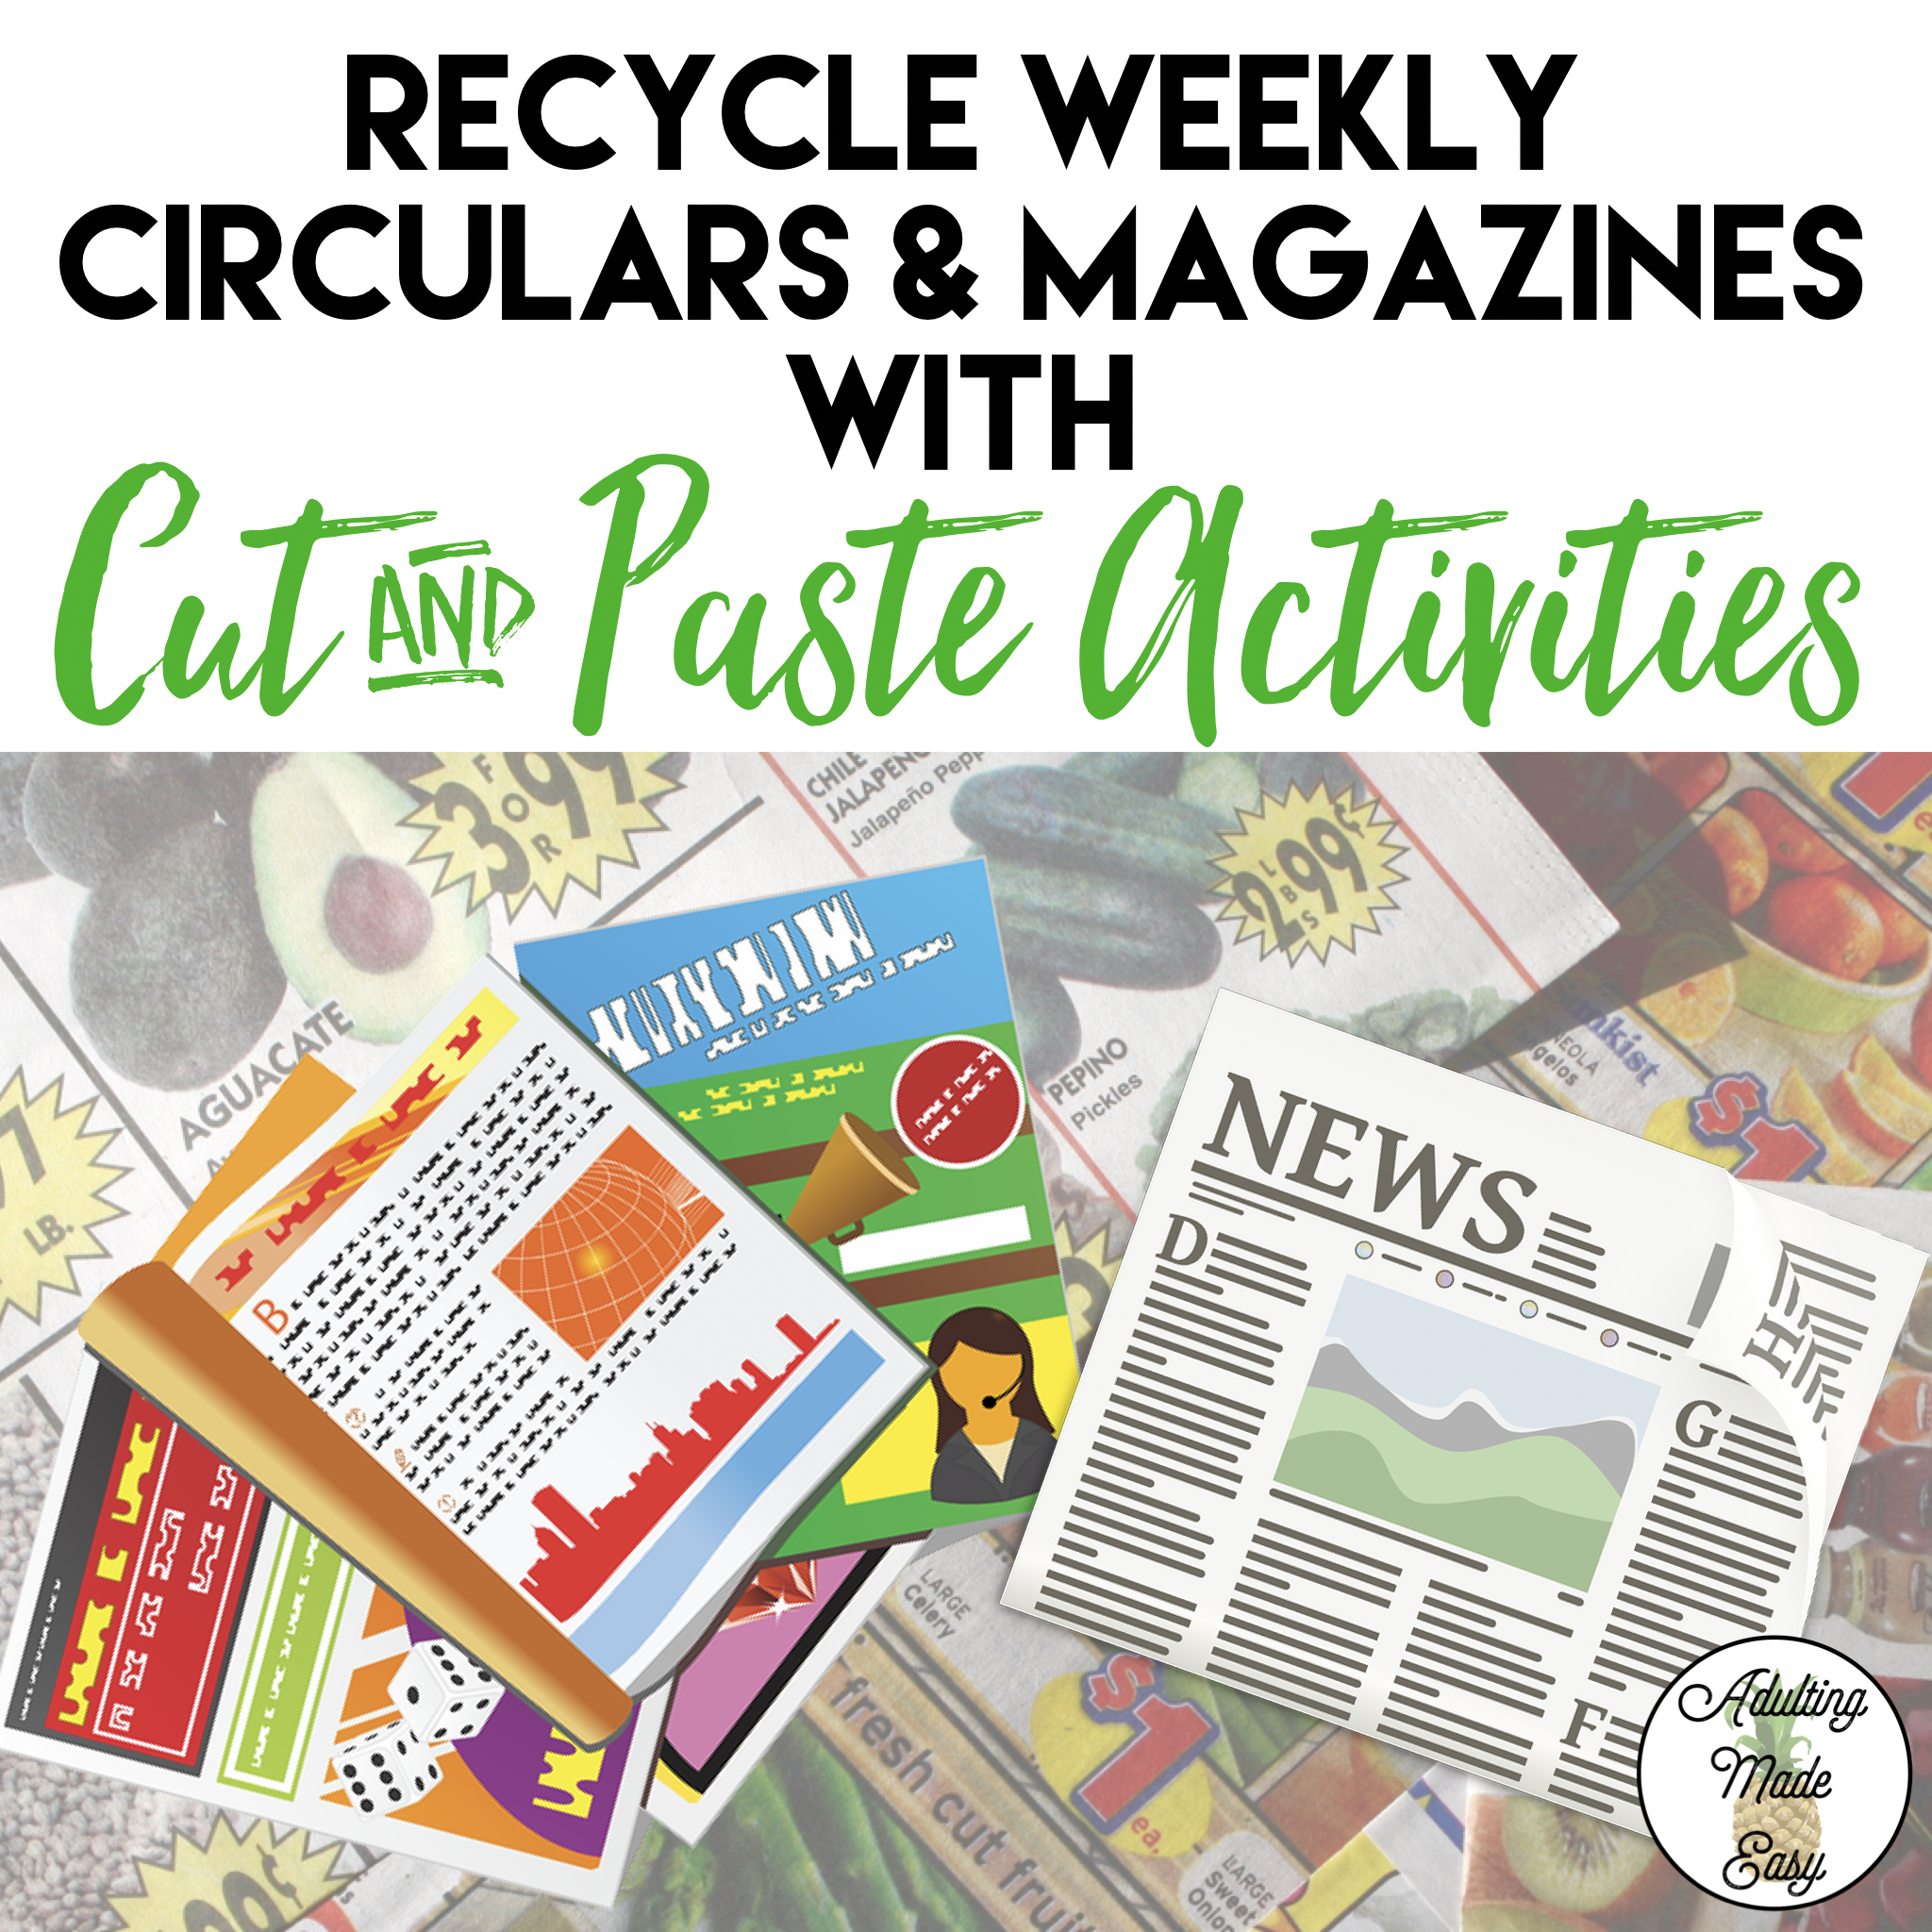 BLOG: How to recycle or reuse weekly circular store ads with these cut & paste activities. Focus on reading, math, nutrition, CBI, money management, and life skills.